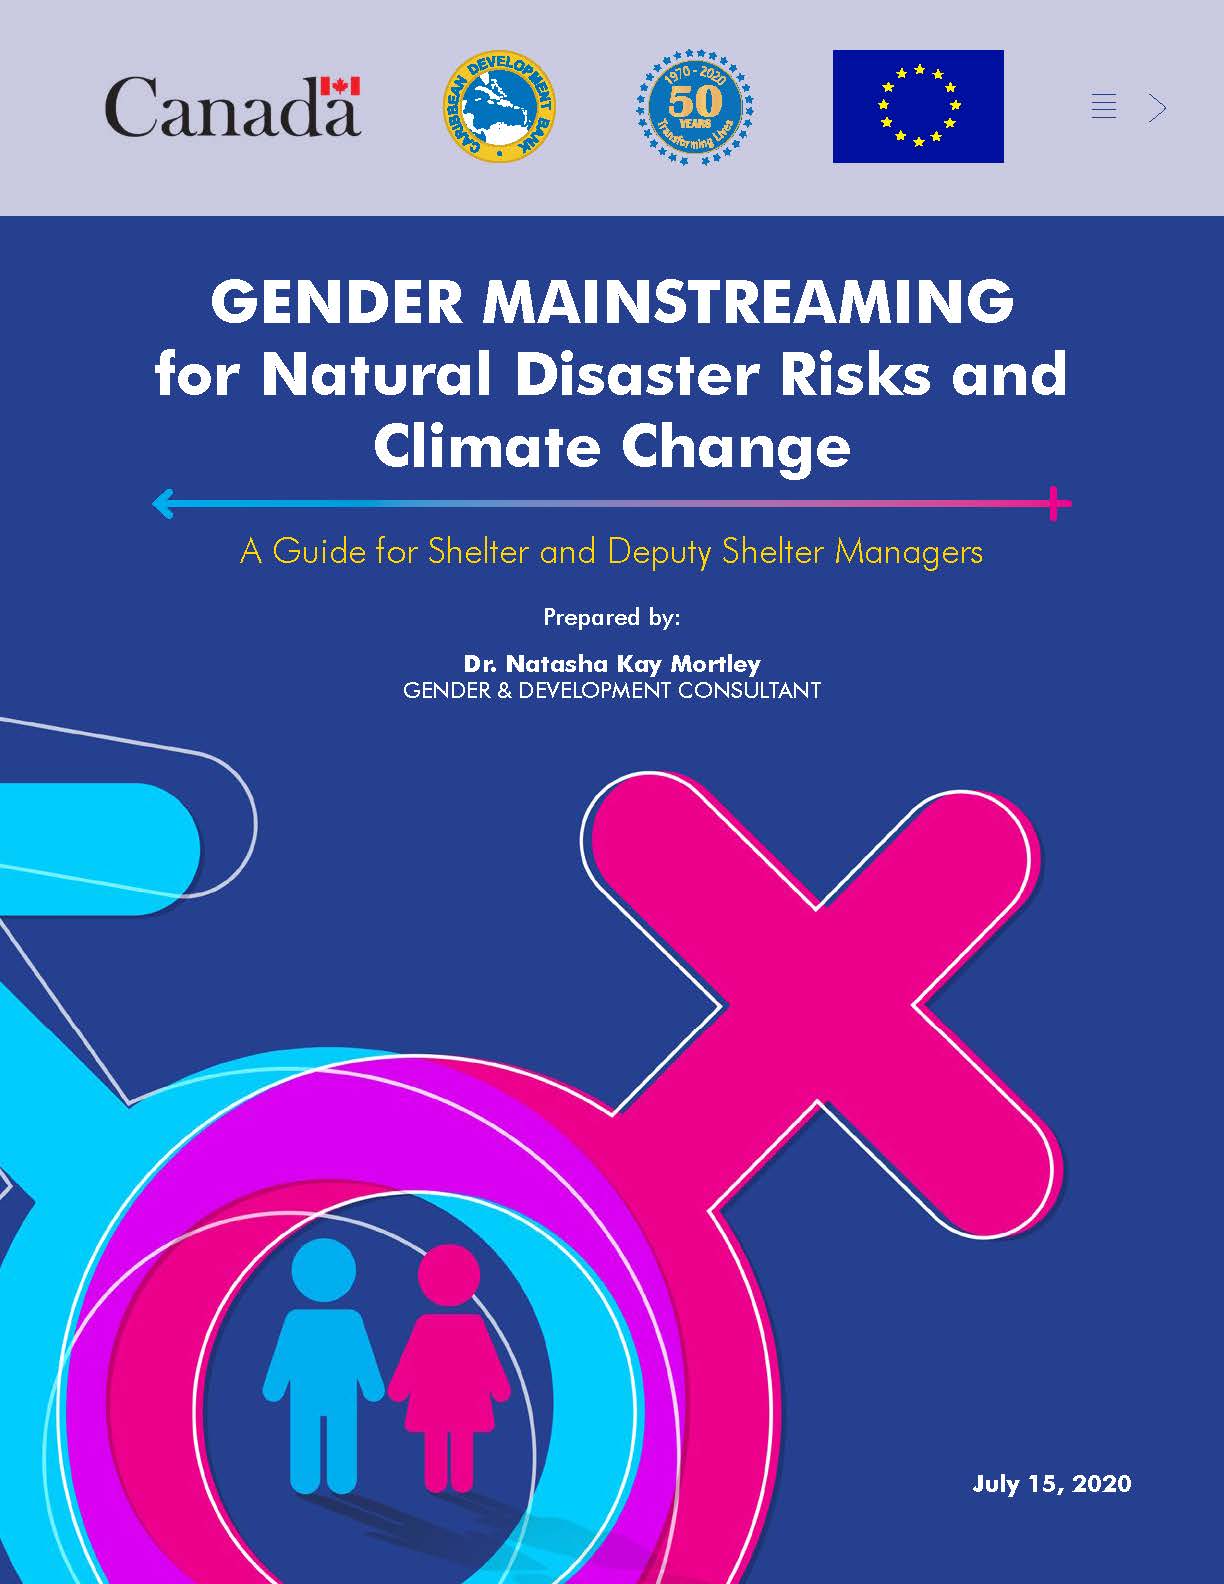 cover with a blue background featuring gender symbols